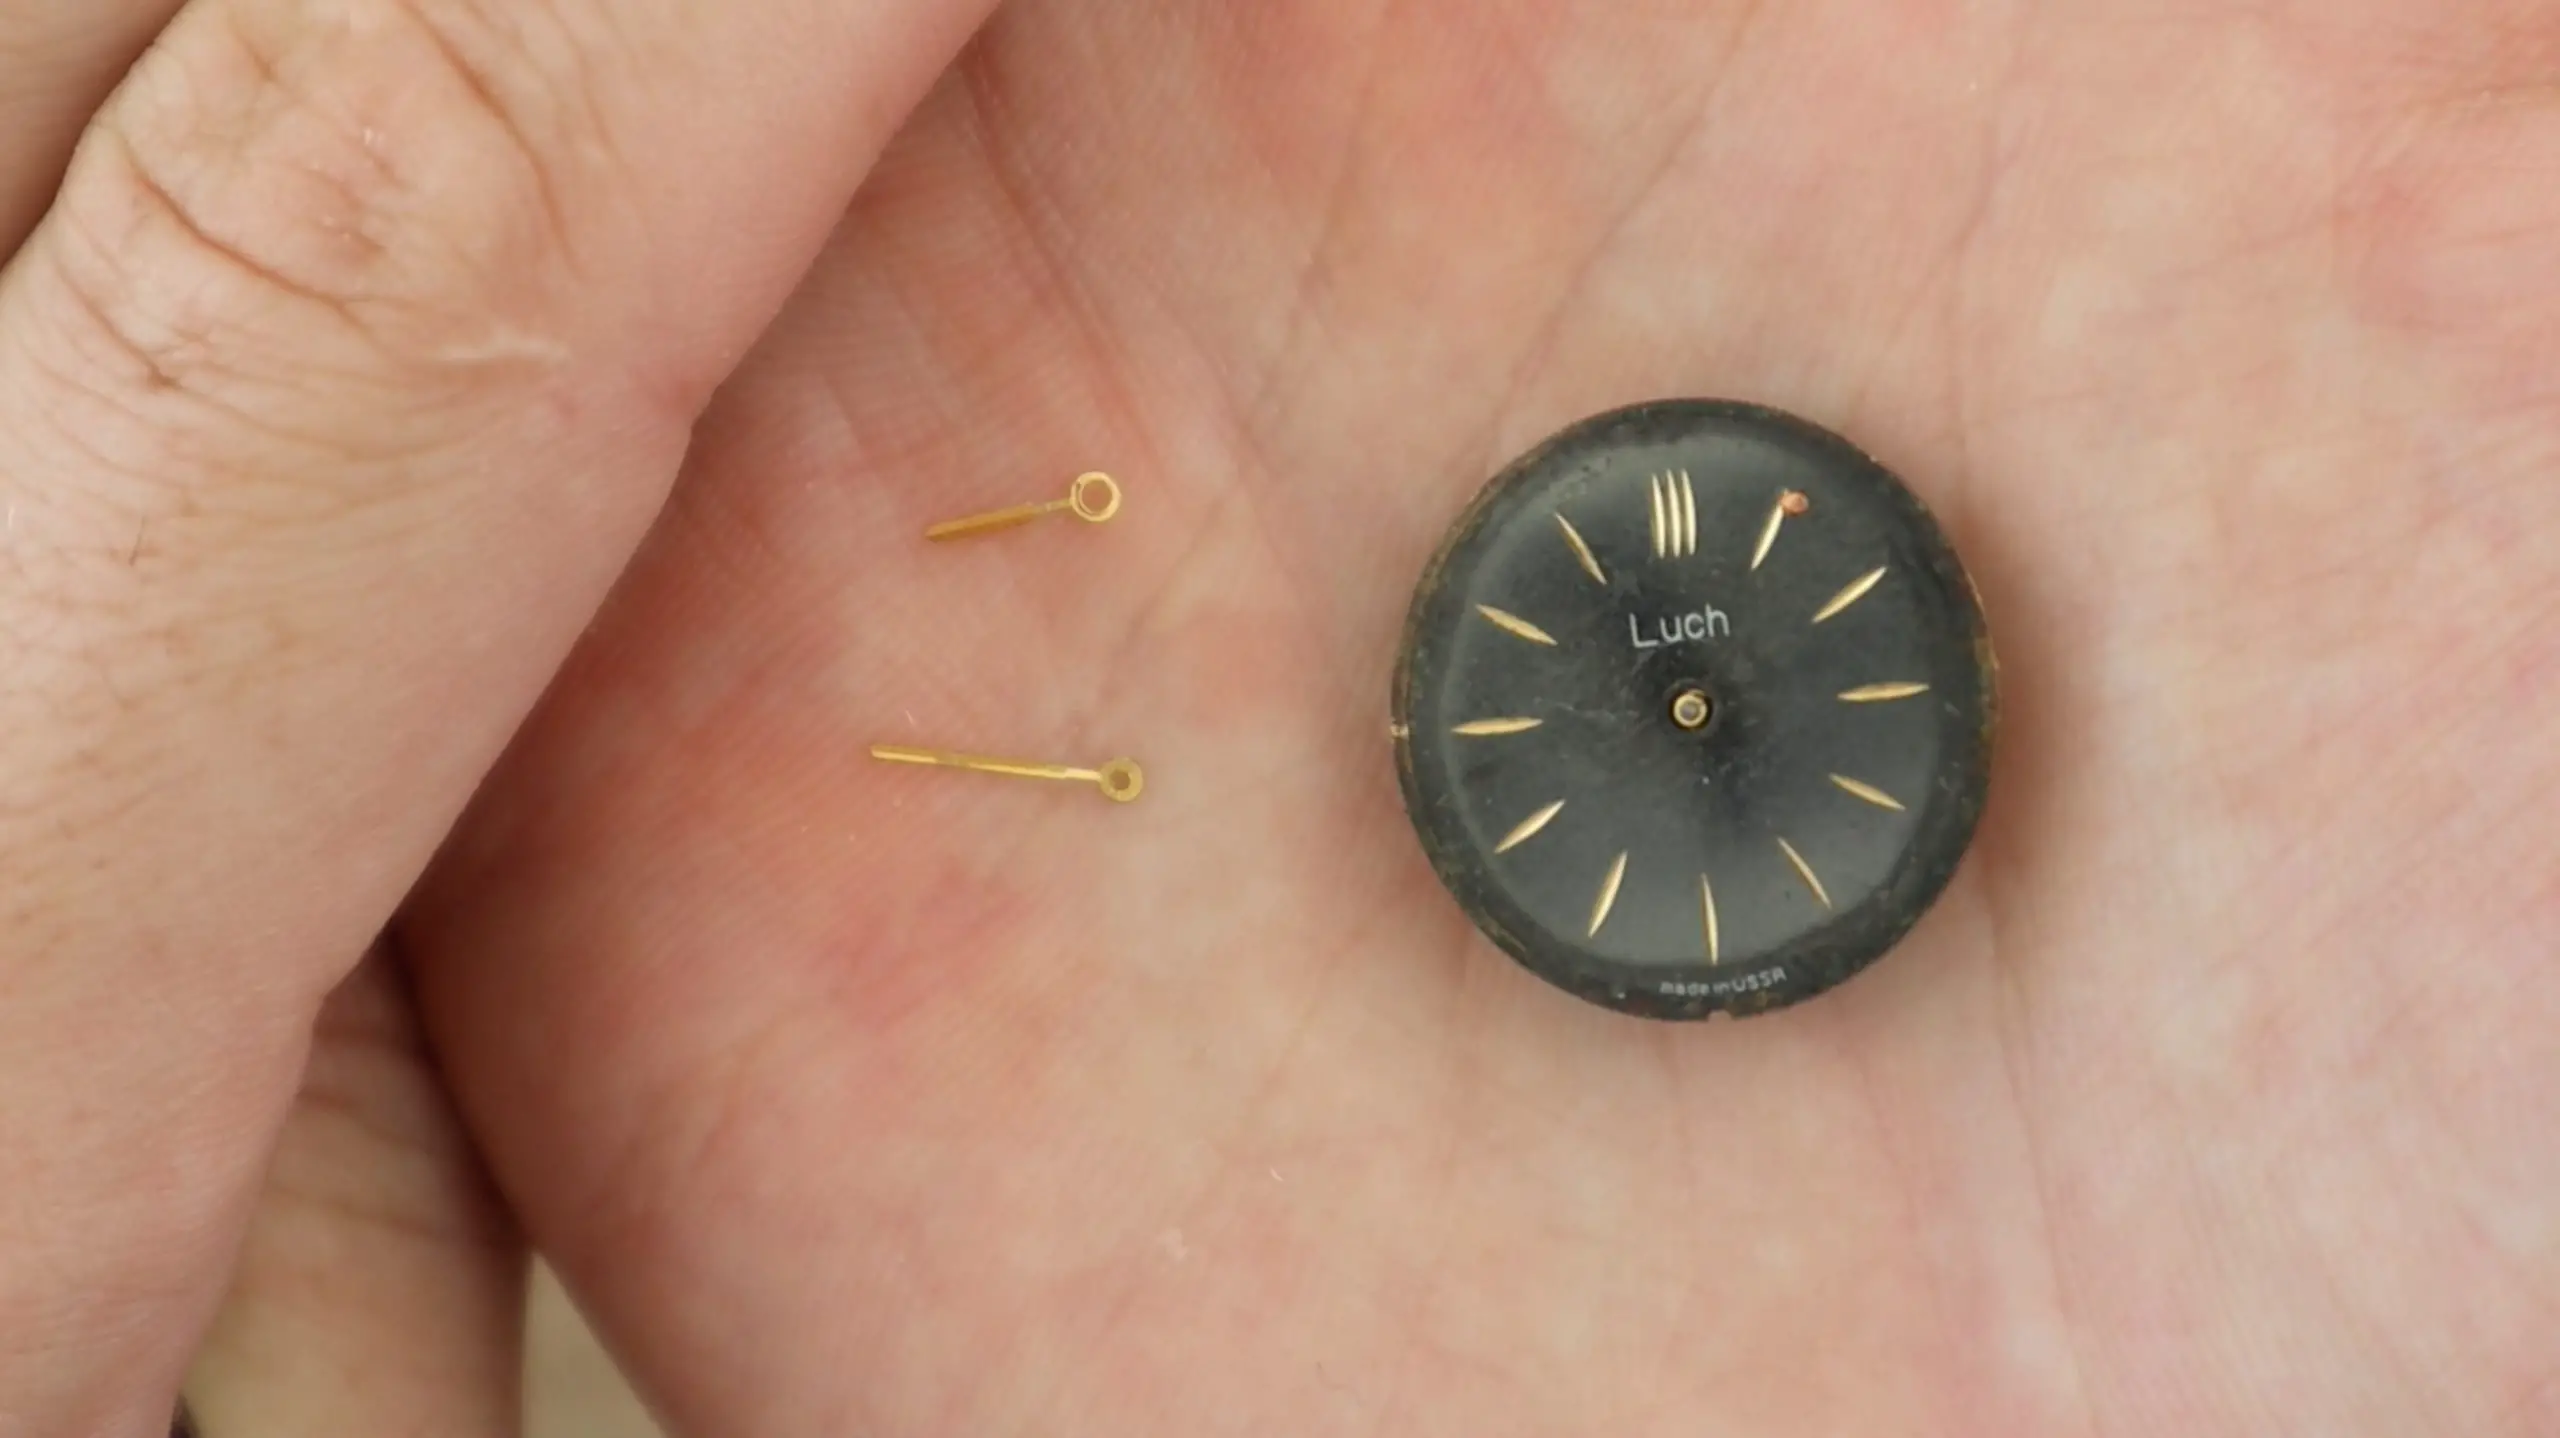 Hands Removed From Watch